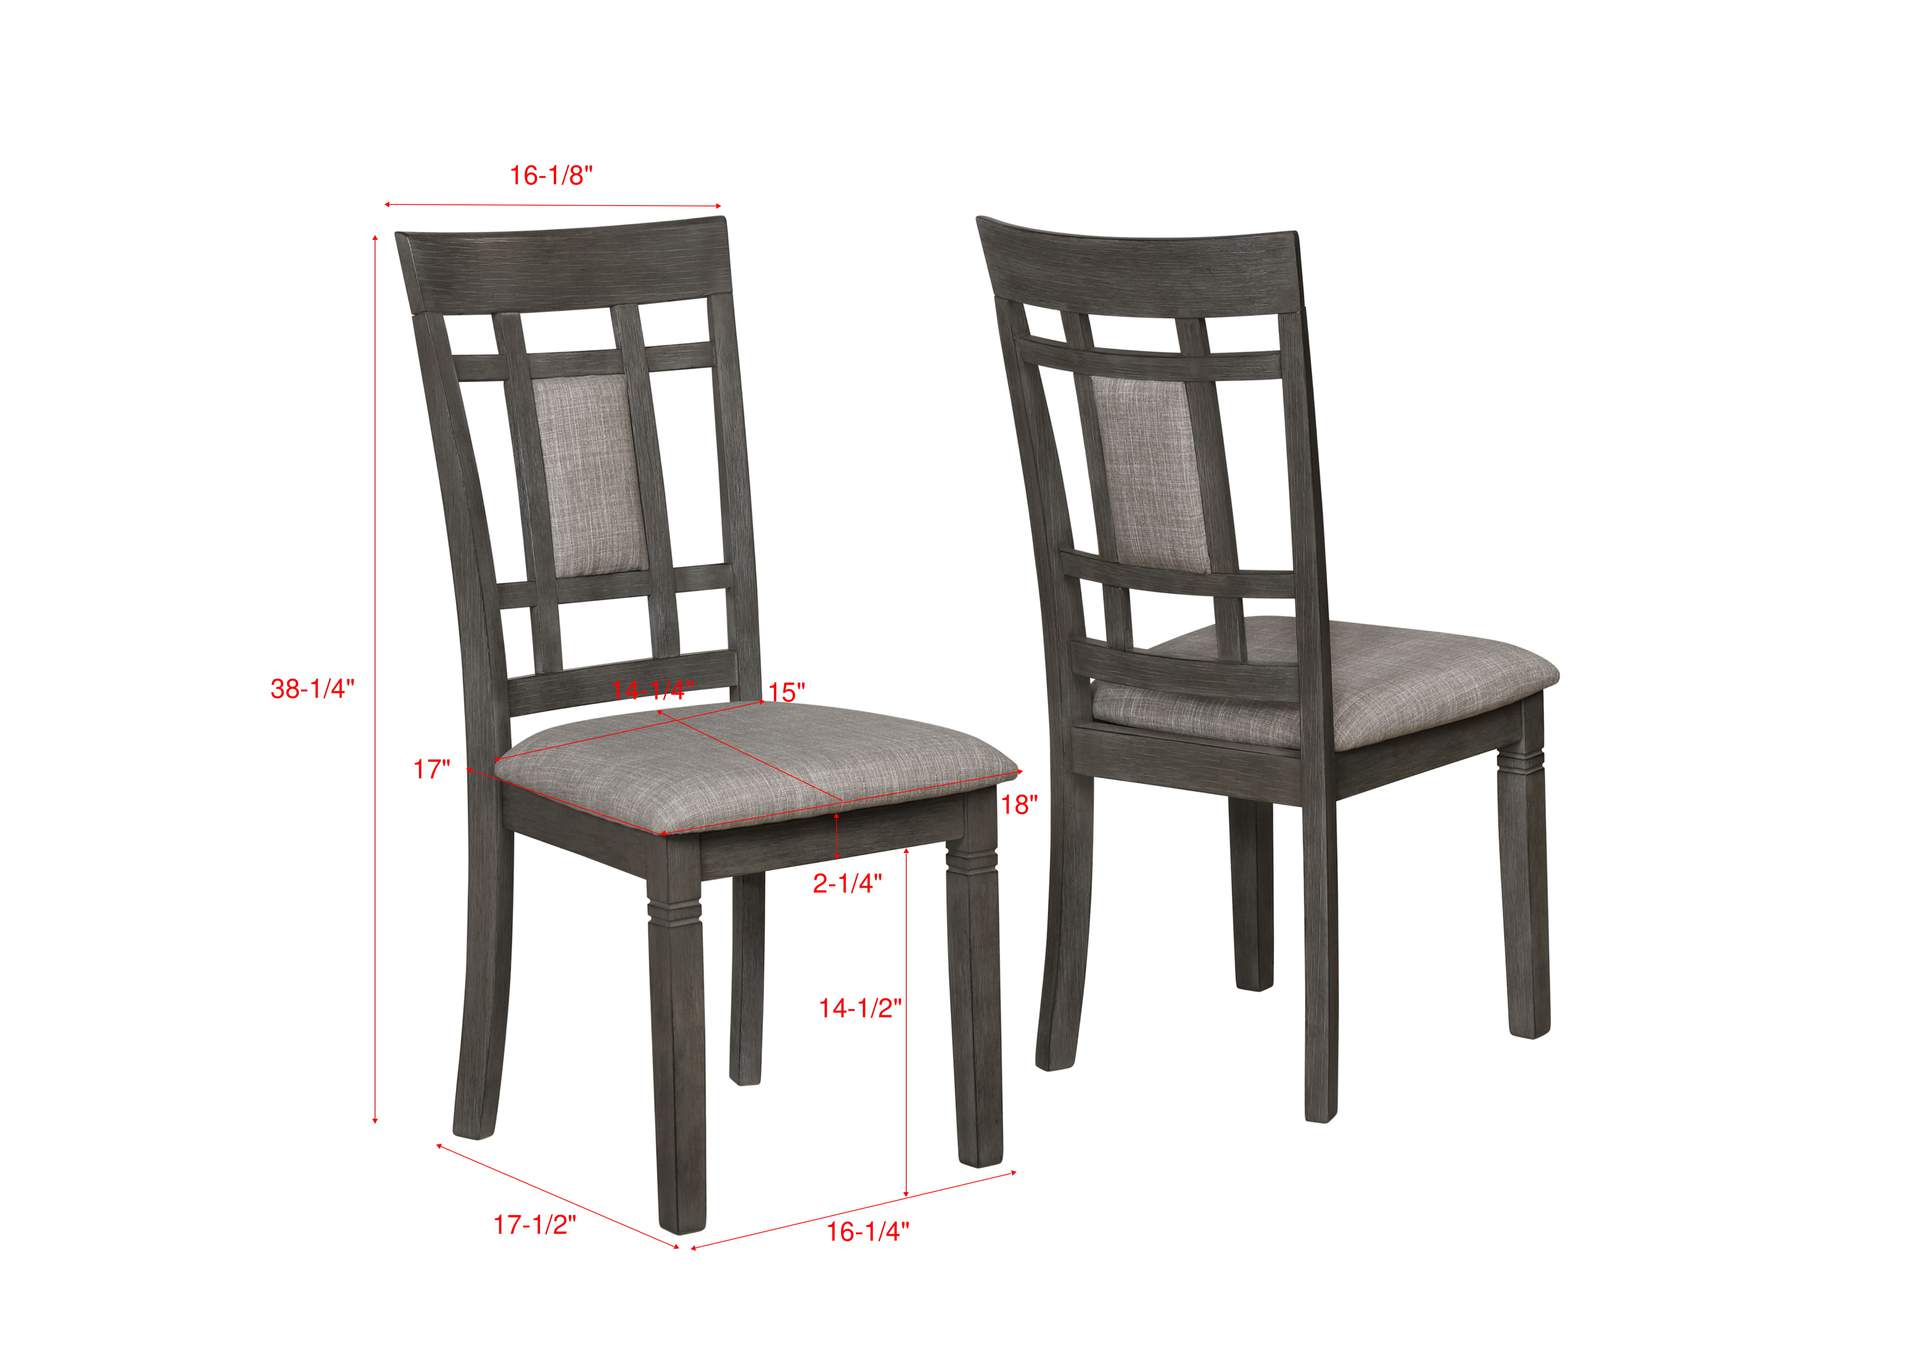 Paige 6 - Pc Dinette Set With Bench,Crown Mark